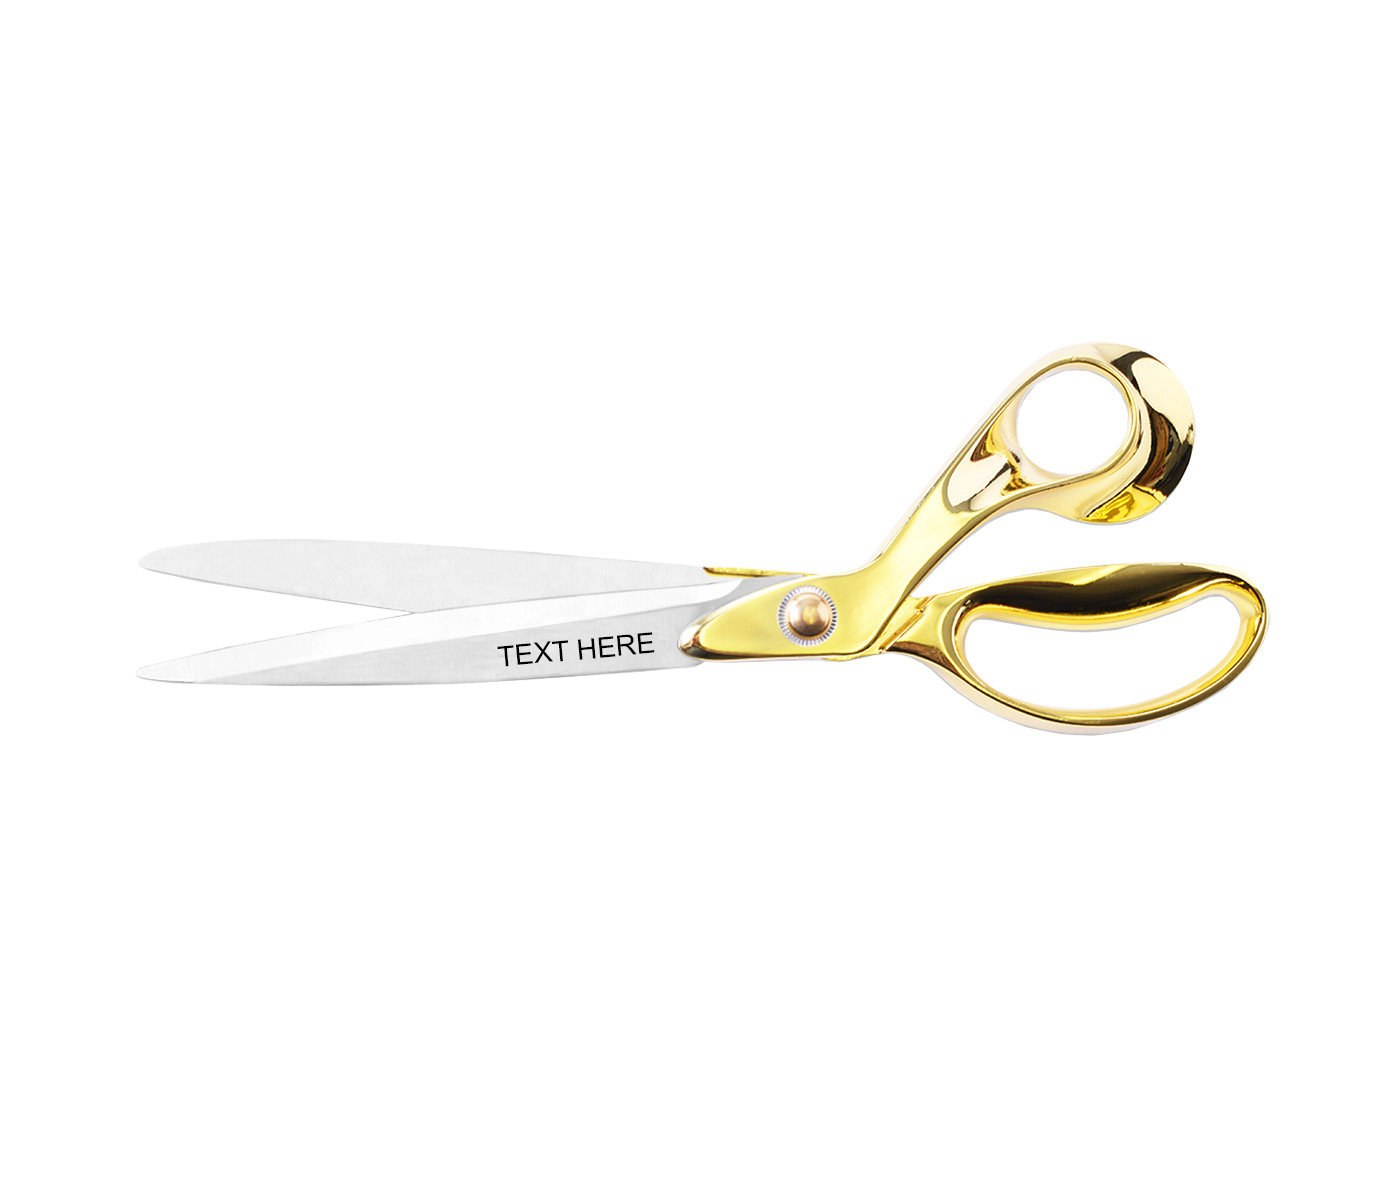 The Largest Ceremonial Scissors in the World - 40 inch GOLD Handle Scissors  with Silver Blades